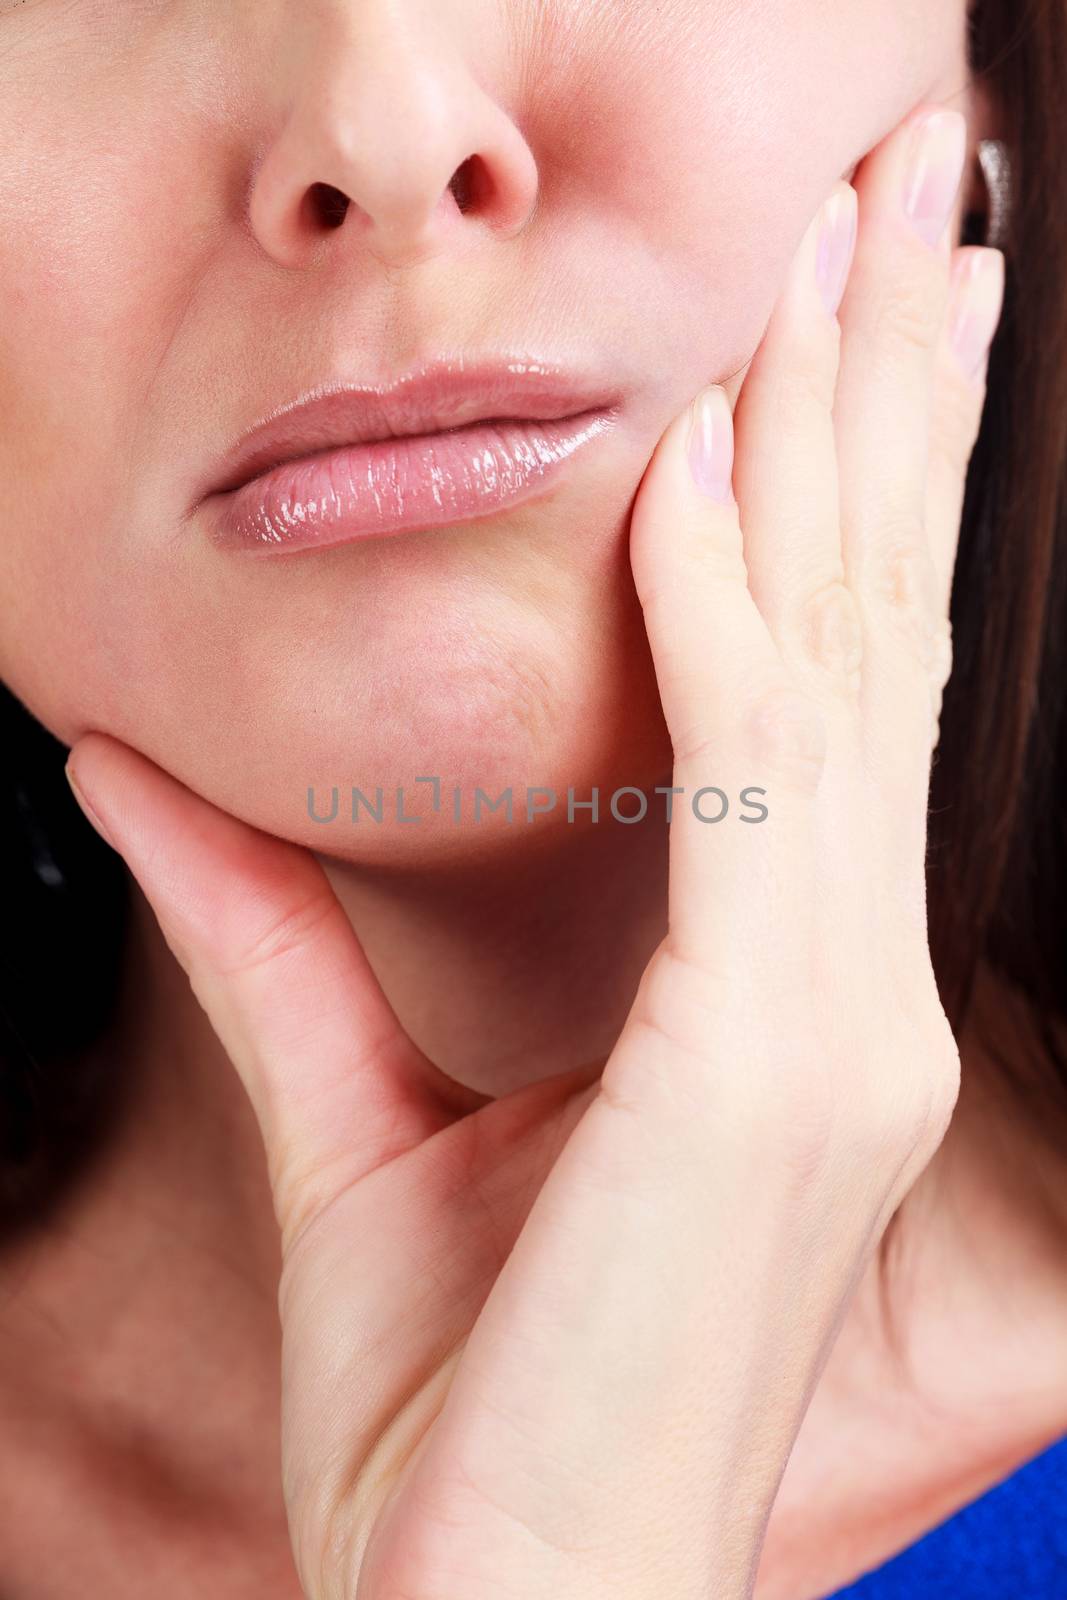 Woman with toothpain